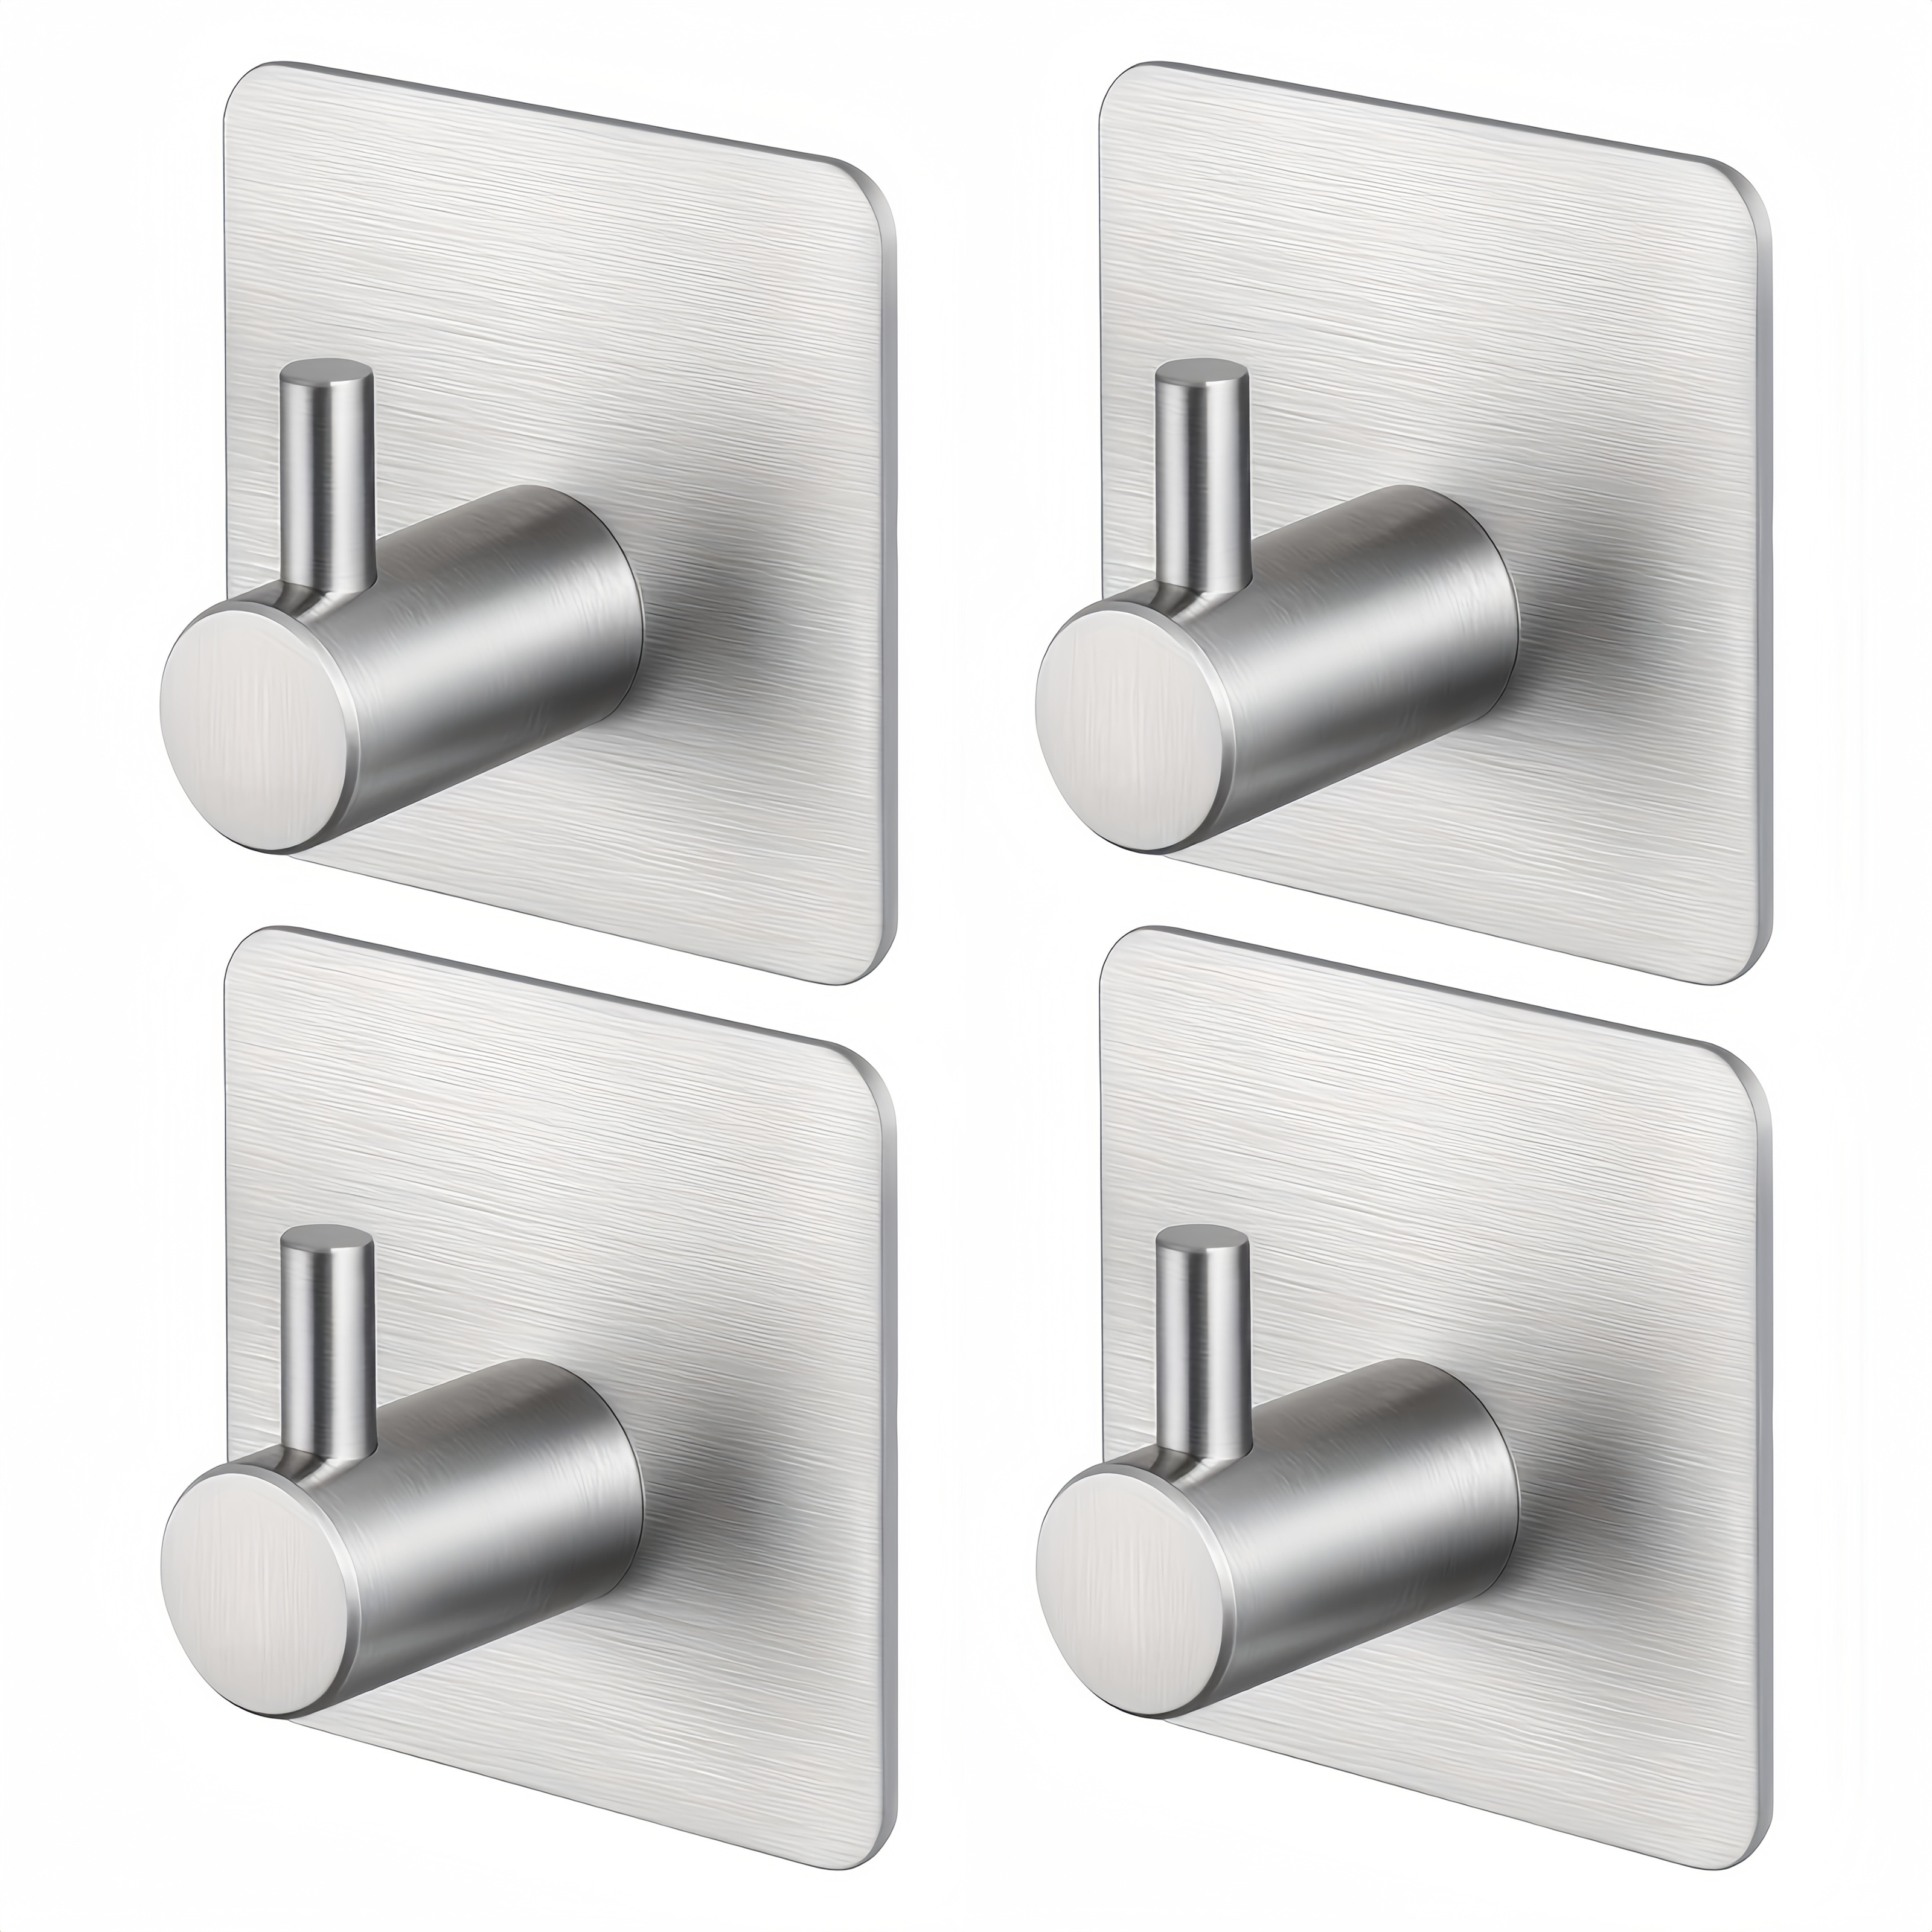 

4pcs Self-adhesive Towel Hooks Stainless Steel, Stick-on Wall Hooks For Home Coat, Robe, And Bathroom Organization